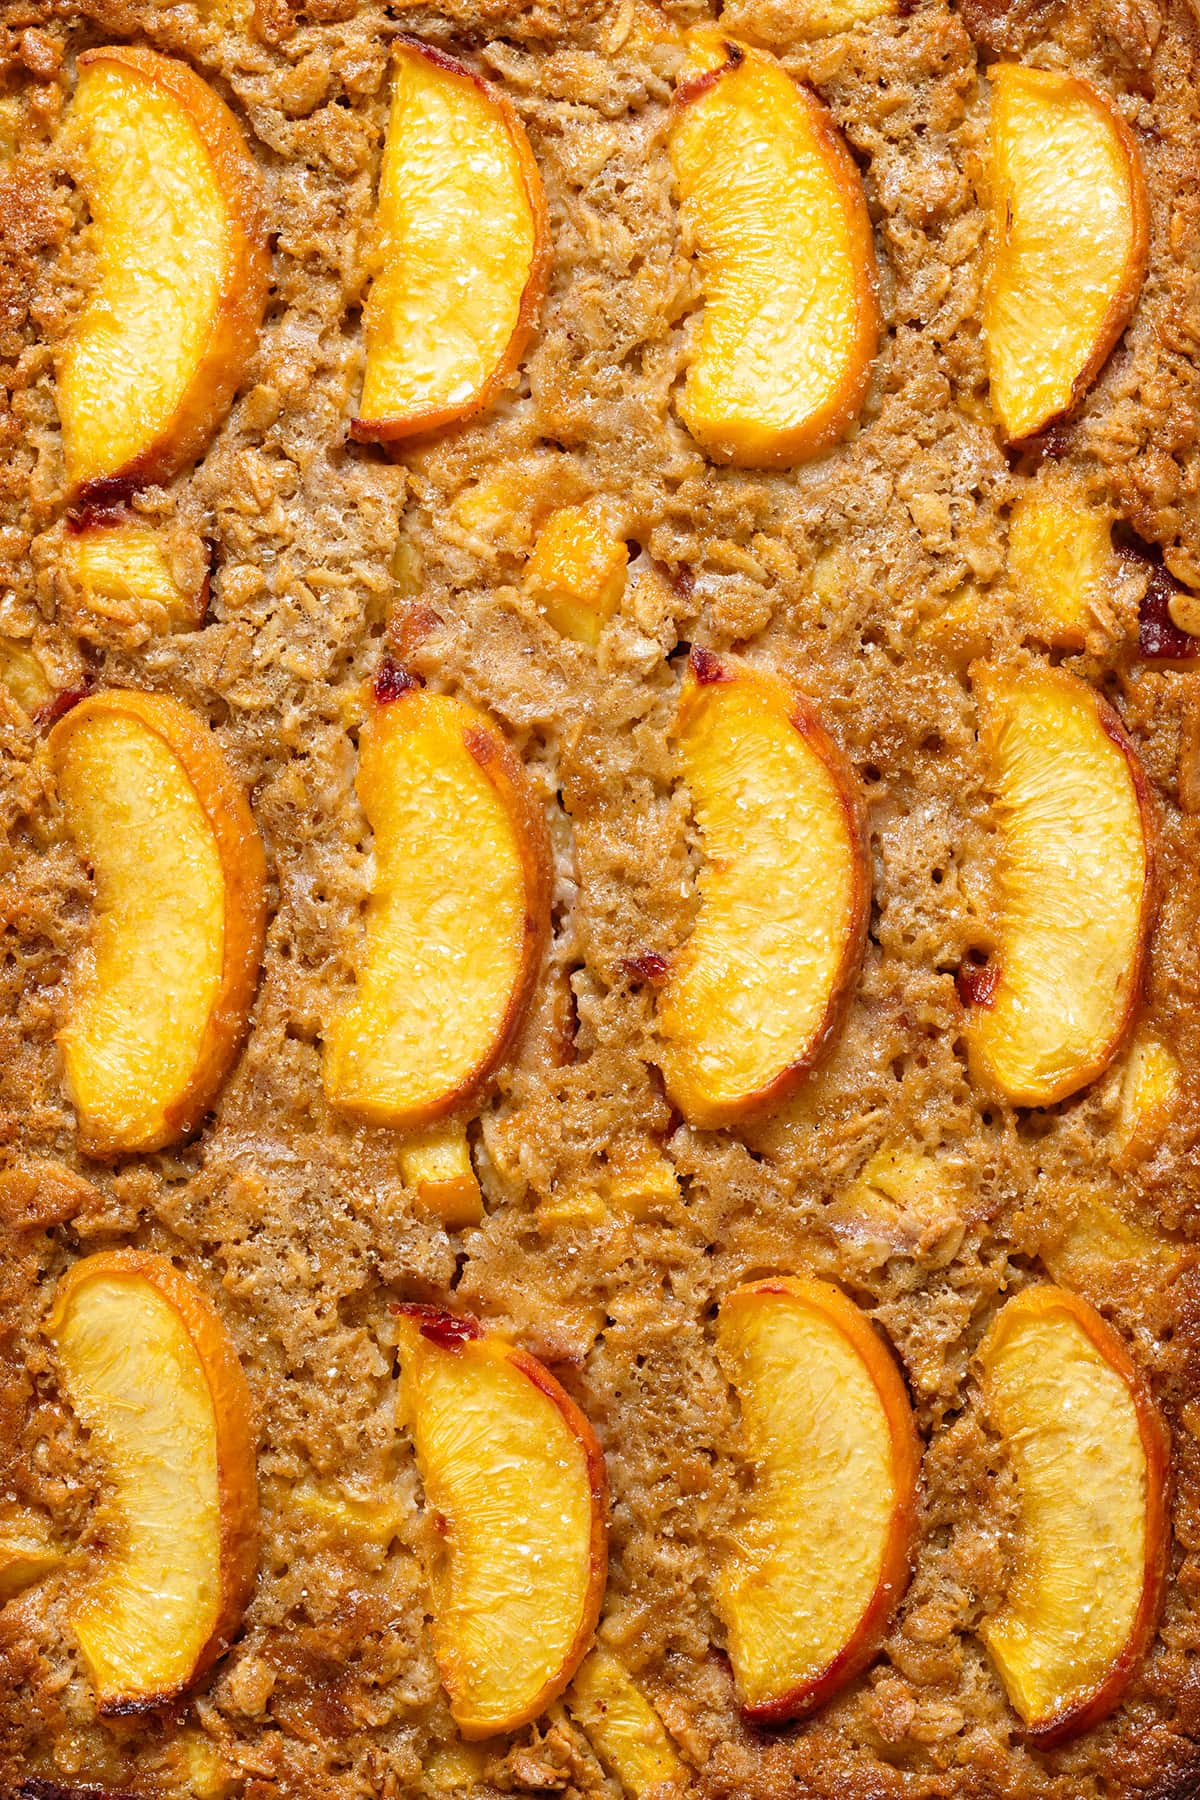 Baked oatmeal with caramelized peaches on top.